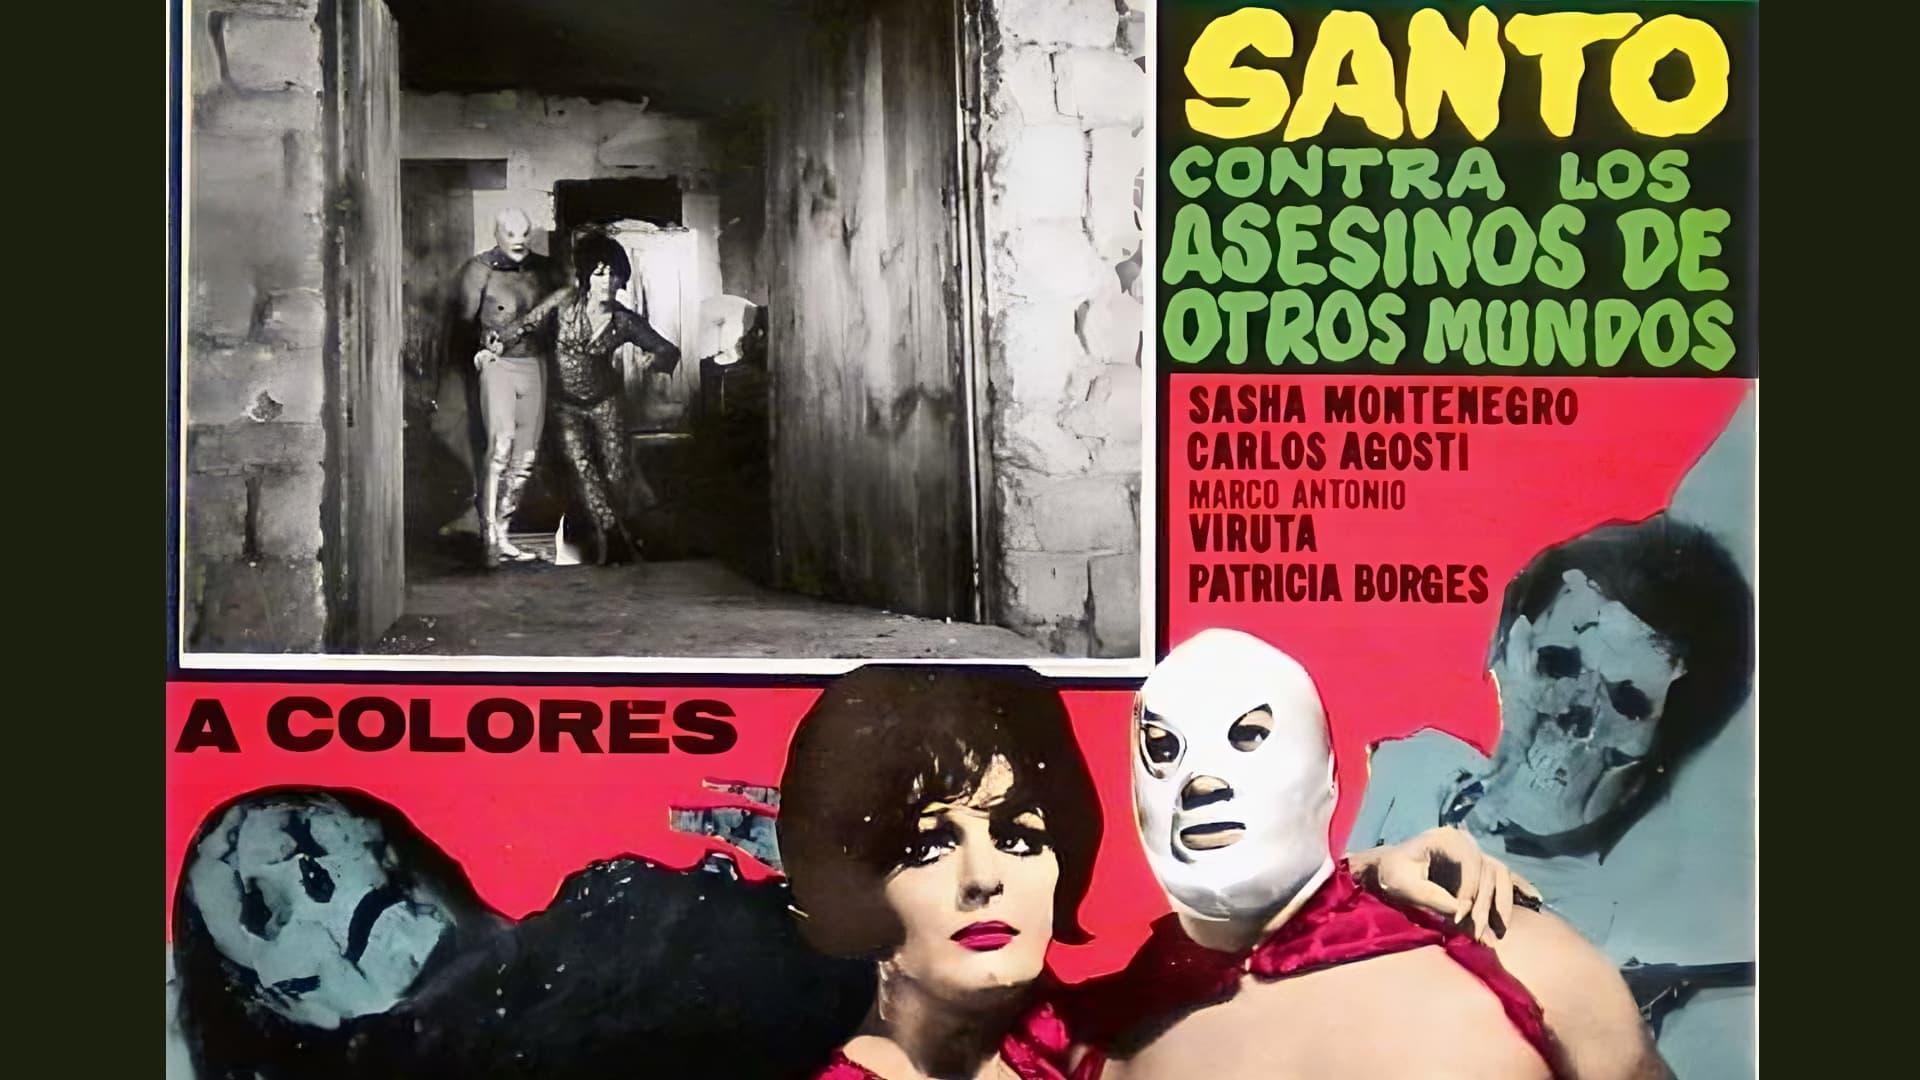 Santo vs. the Killers from Other Worlds backdrop